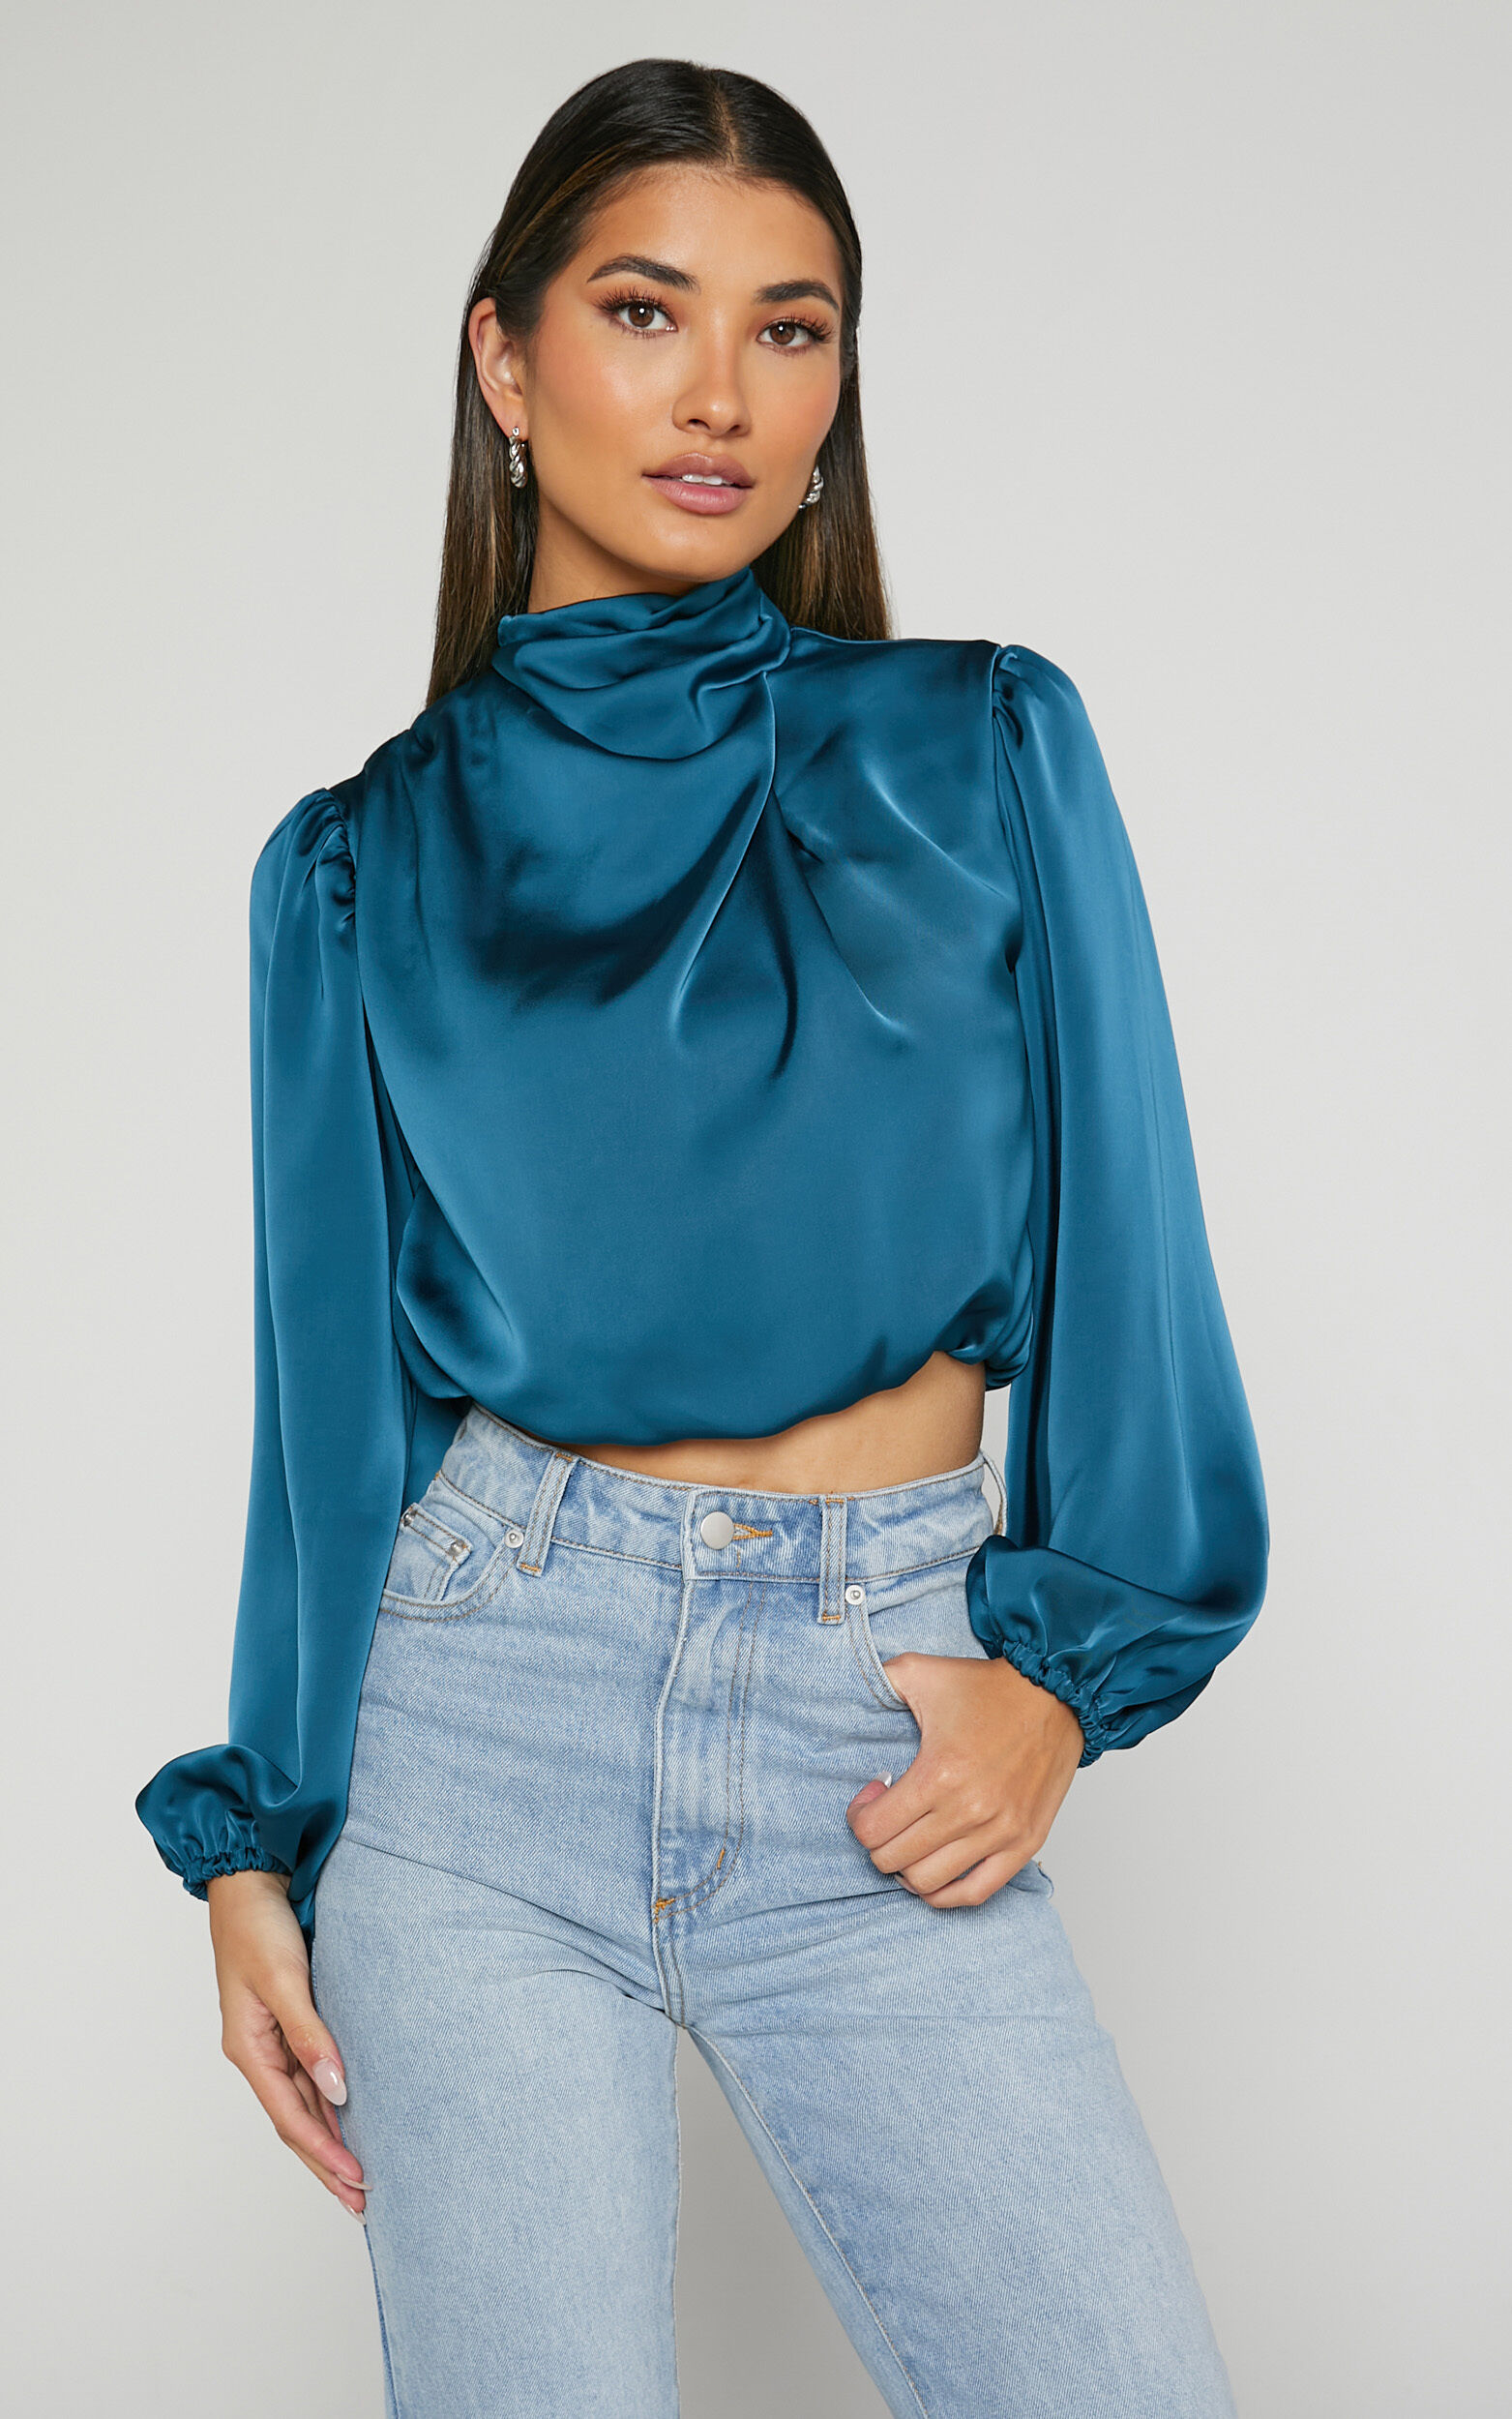 Lila Top - High Neck Draped Satin Long Sleeve Blouse in Teal - 06, GRN1